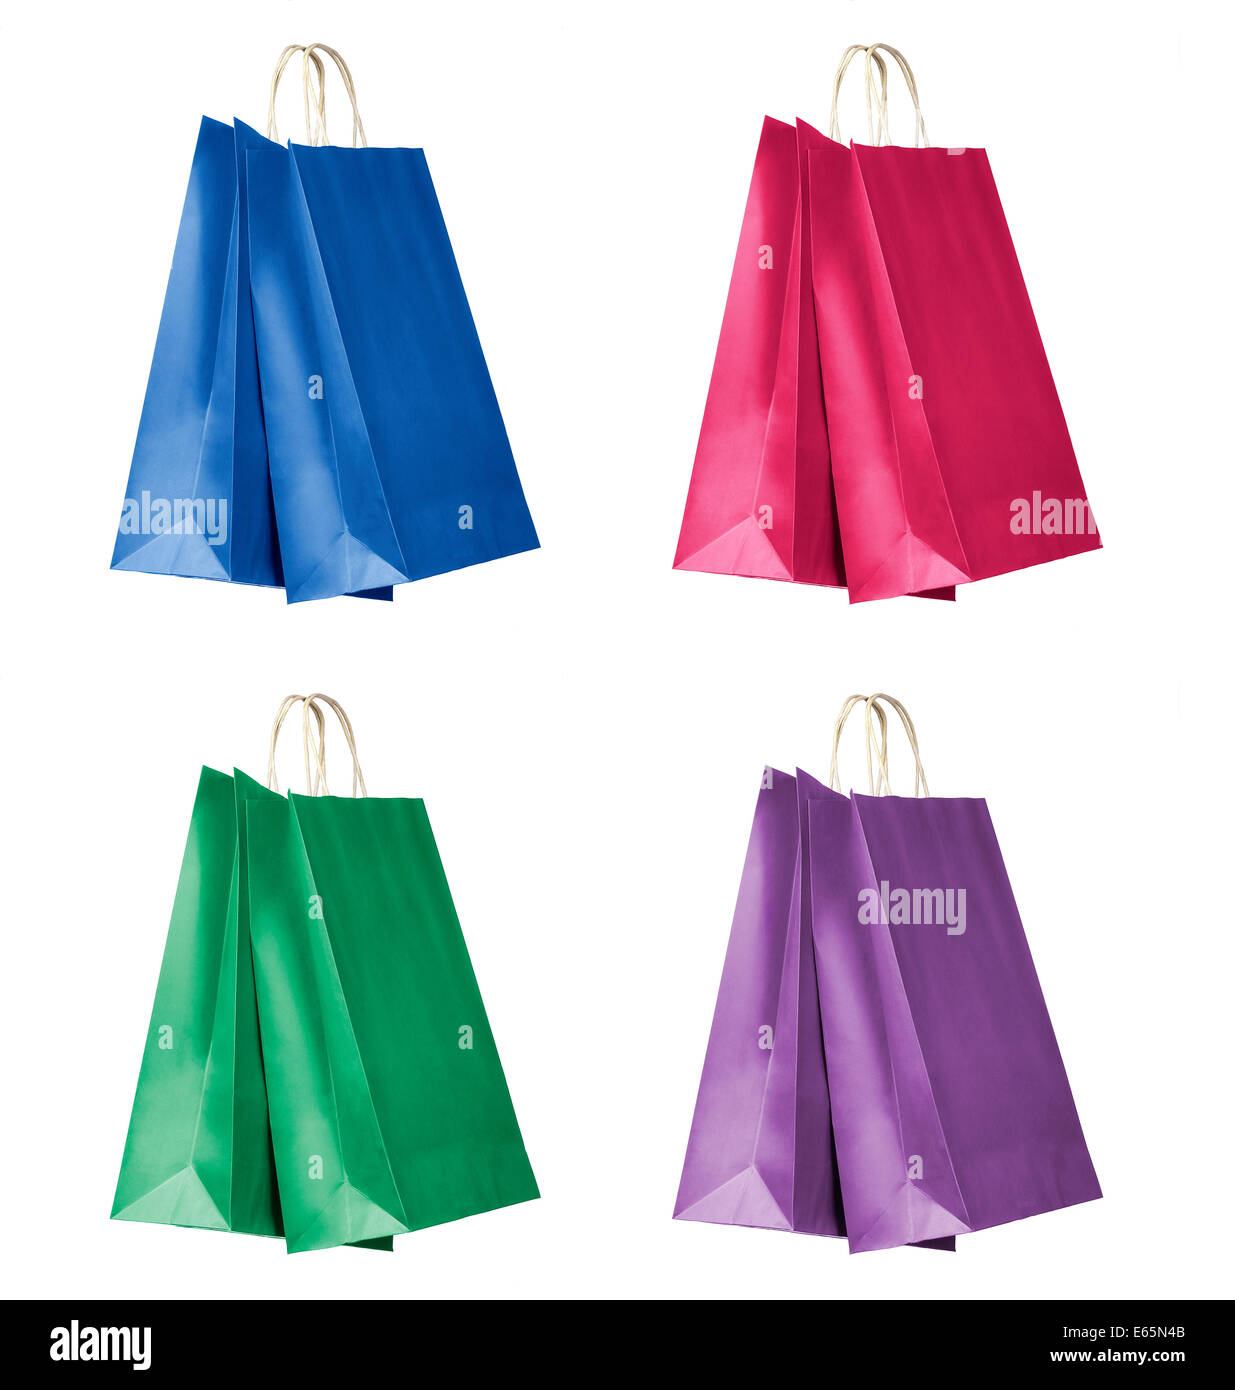 Four color shopping bags isolated on white background. Stock Photo